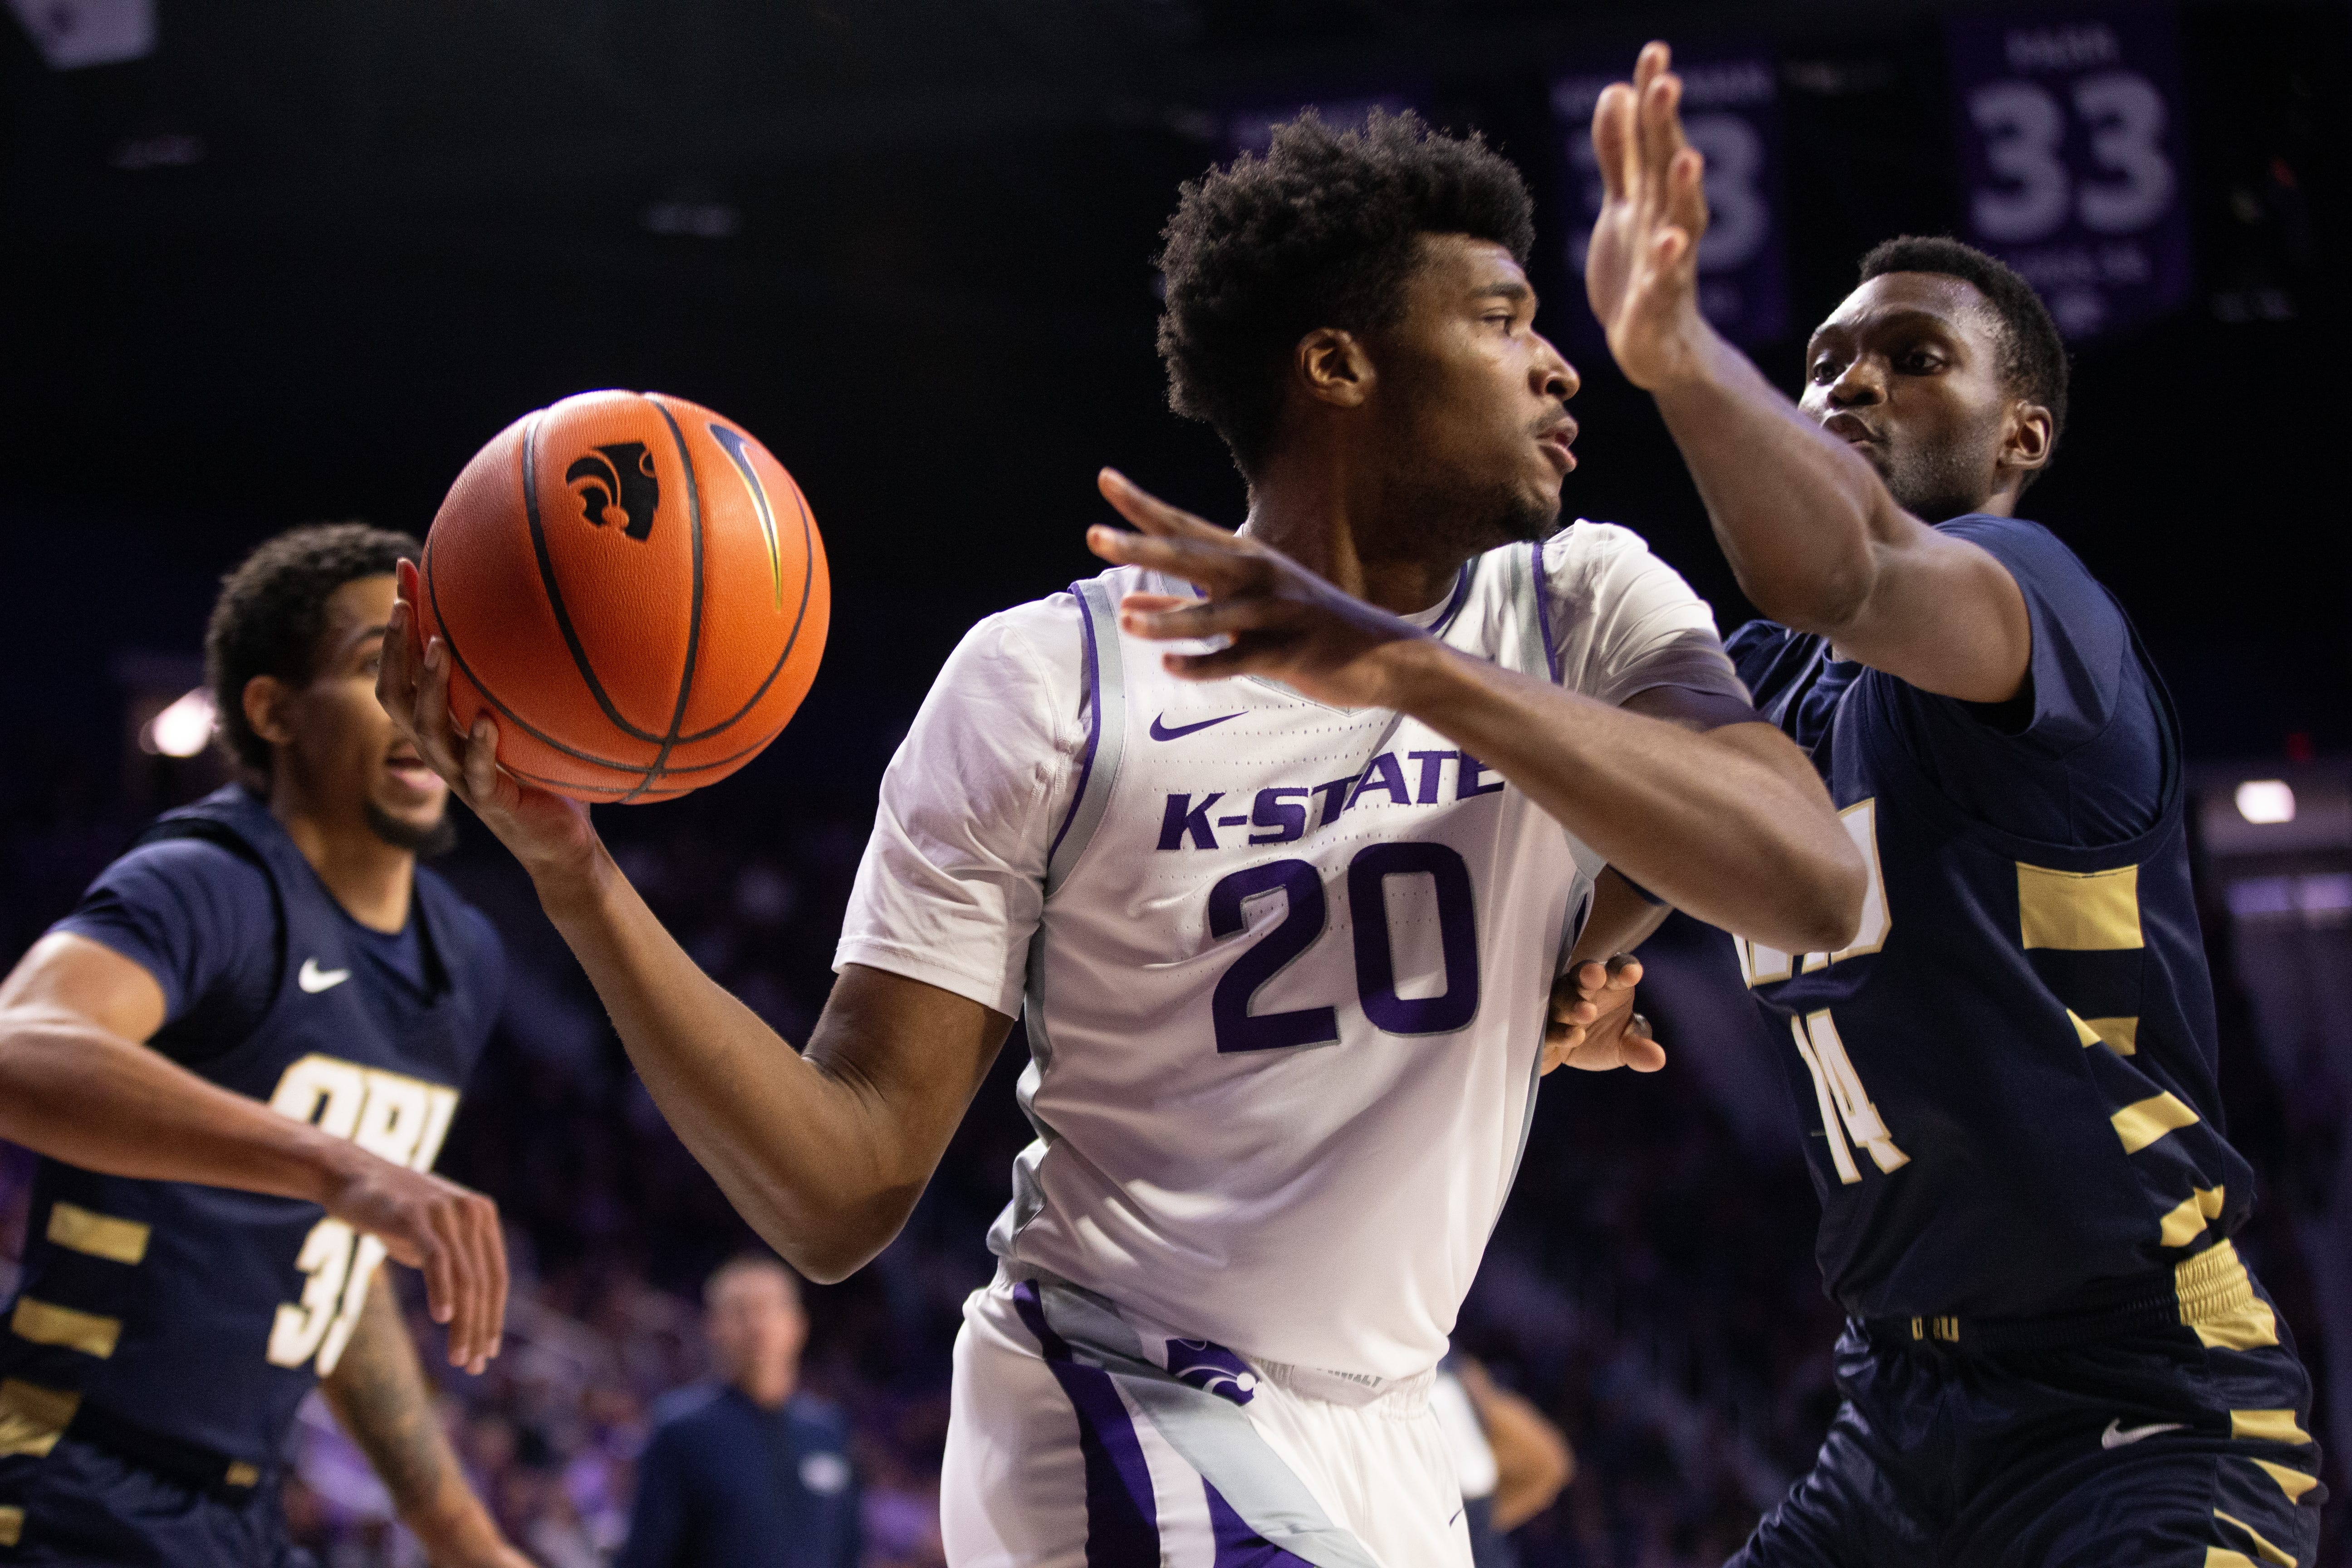 Kansas State redshirt sophomore wing Jerrell Colbert (20) looks for a pass around Oral Roberts graduate forward Deshang Weaver (14) during the first half of Tuesday’s game inside Bramlage Coliseum.